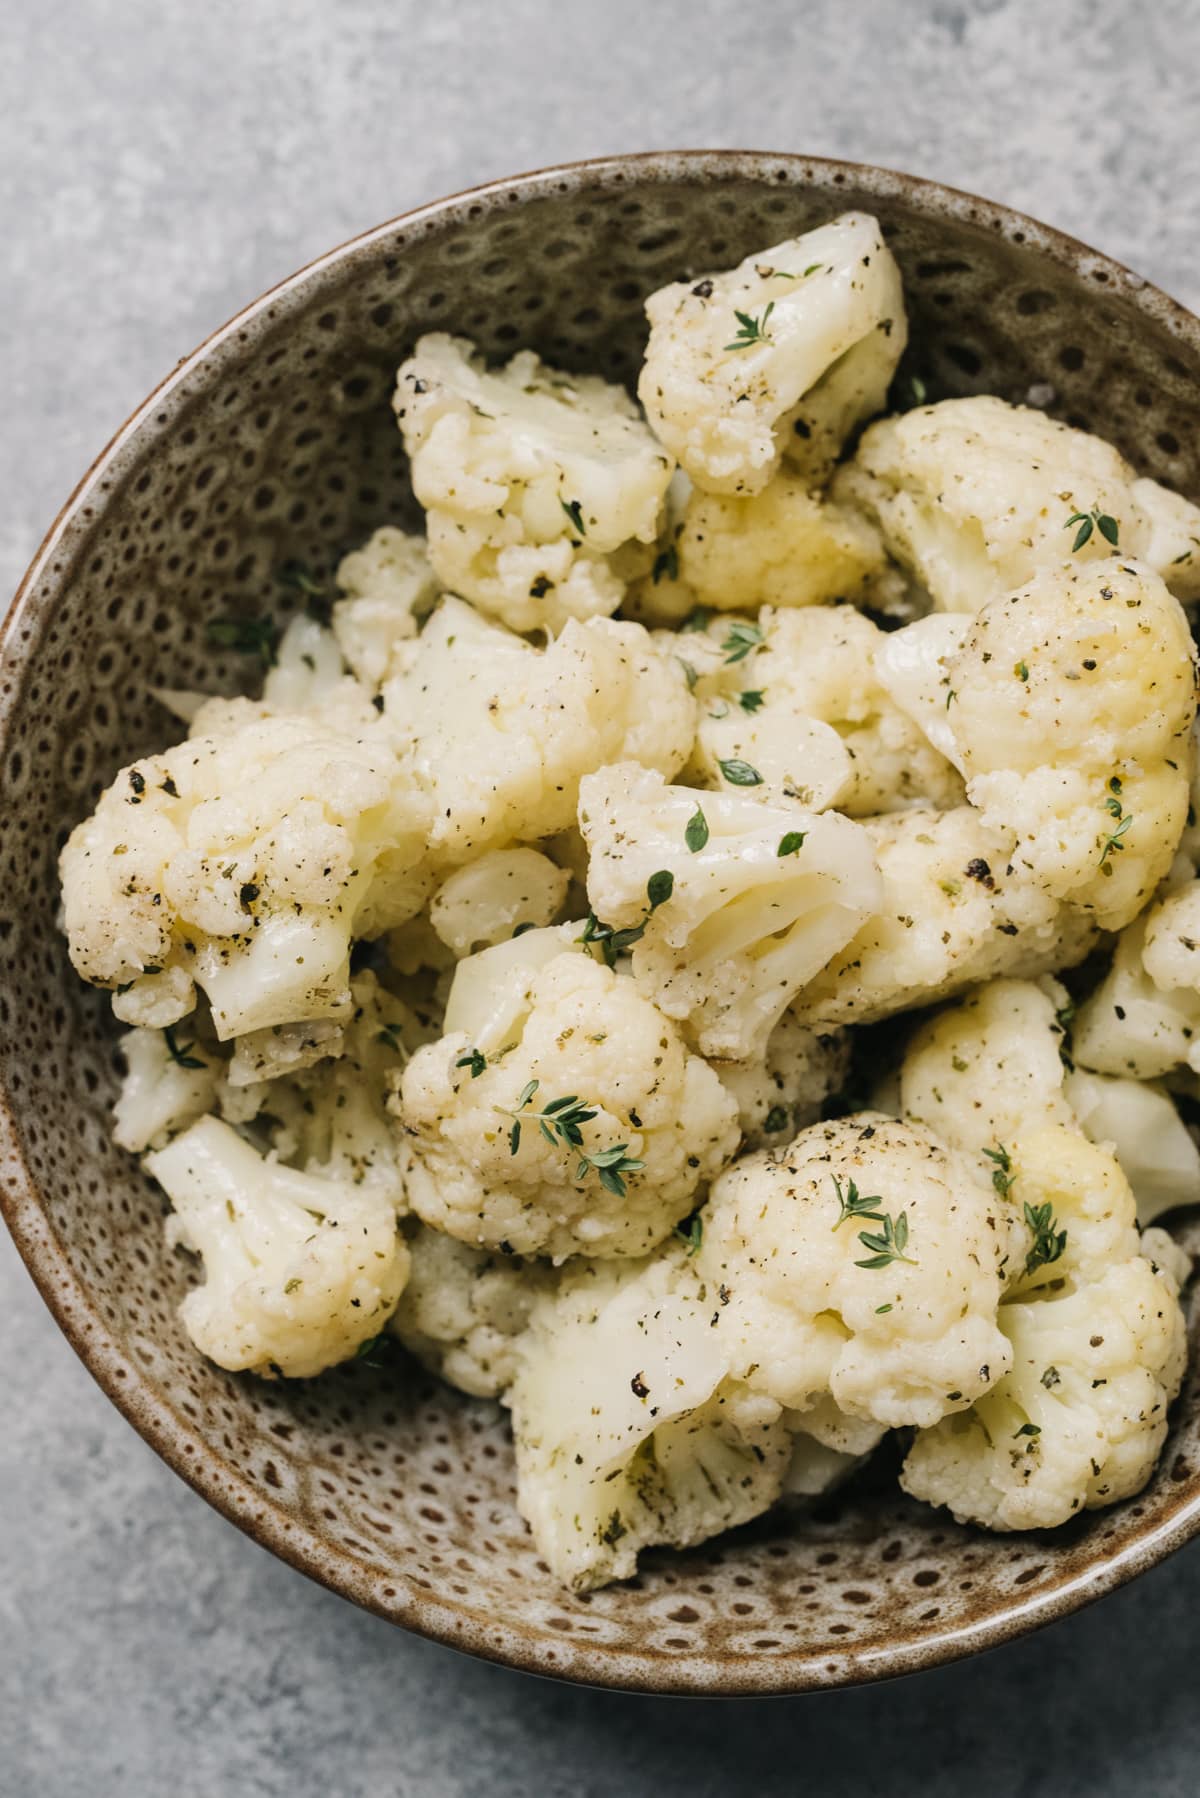 Steamed instant pot cauliflower tossed with olive oil and fresh herbs in a brown speckled bowl on a concrete background.